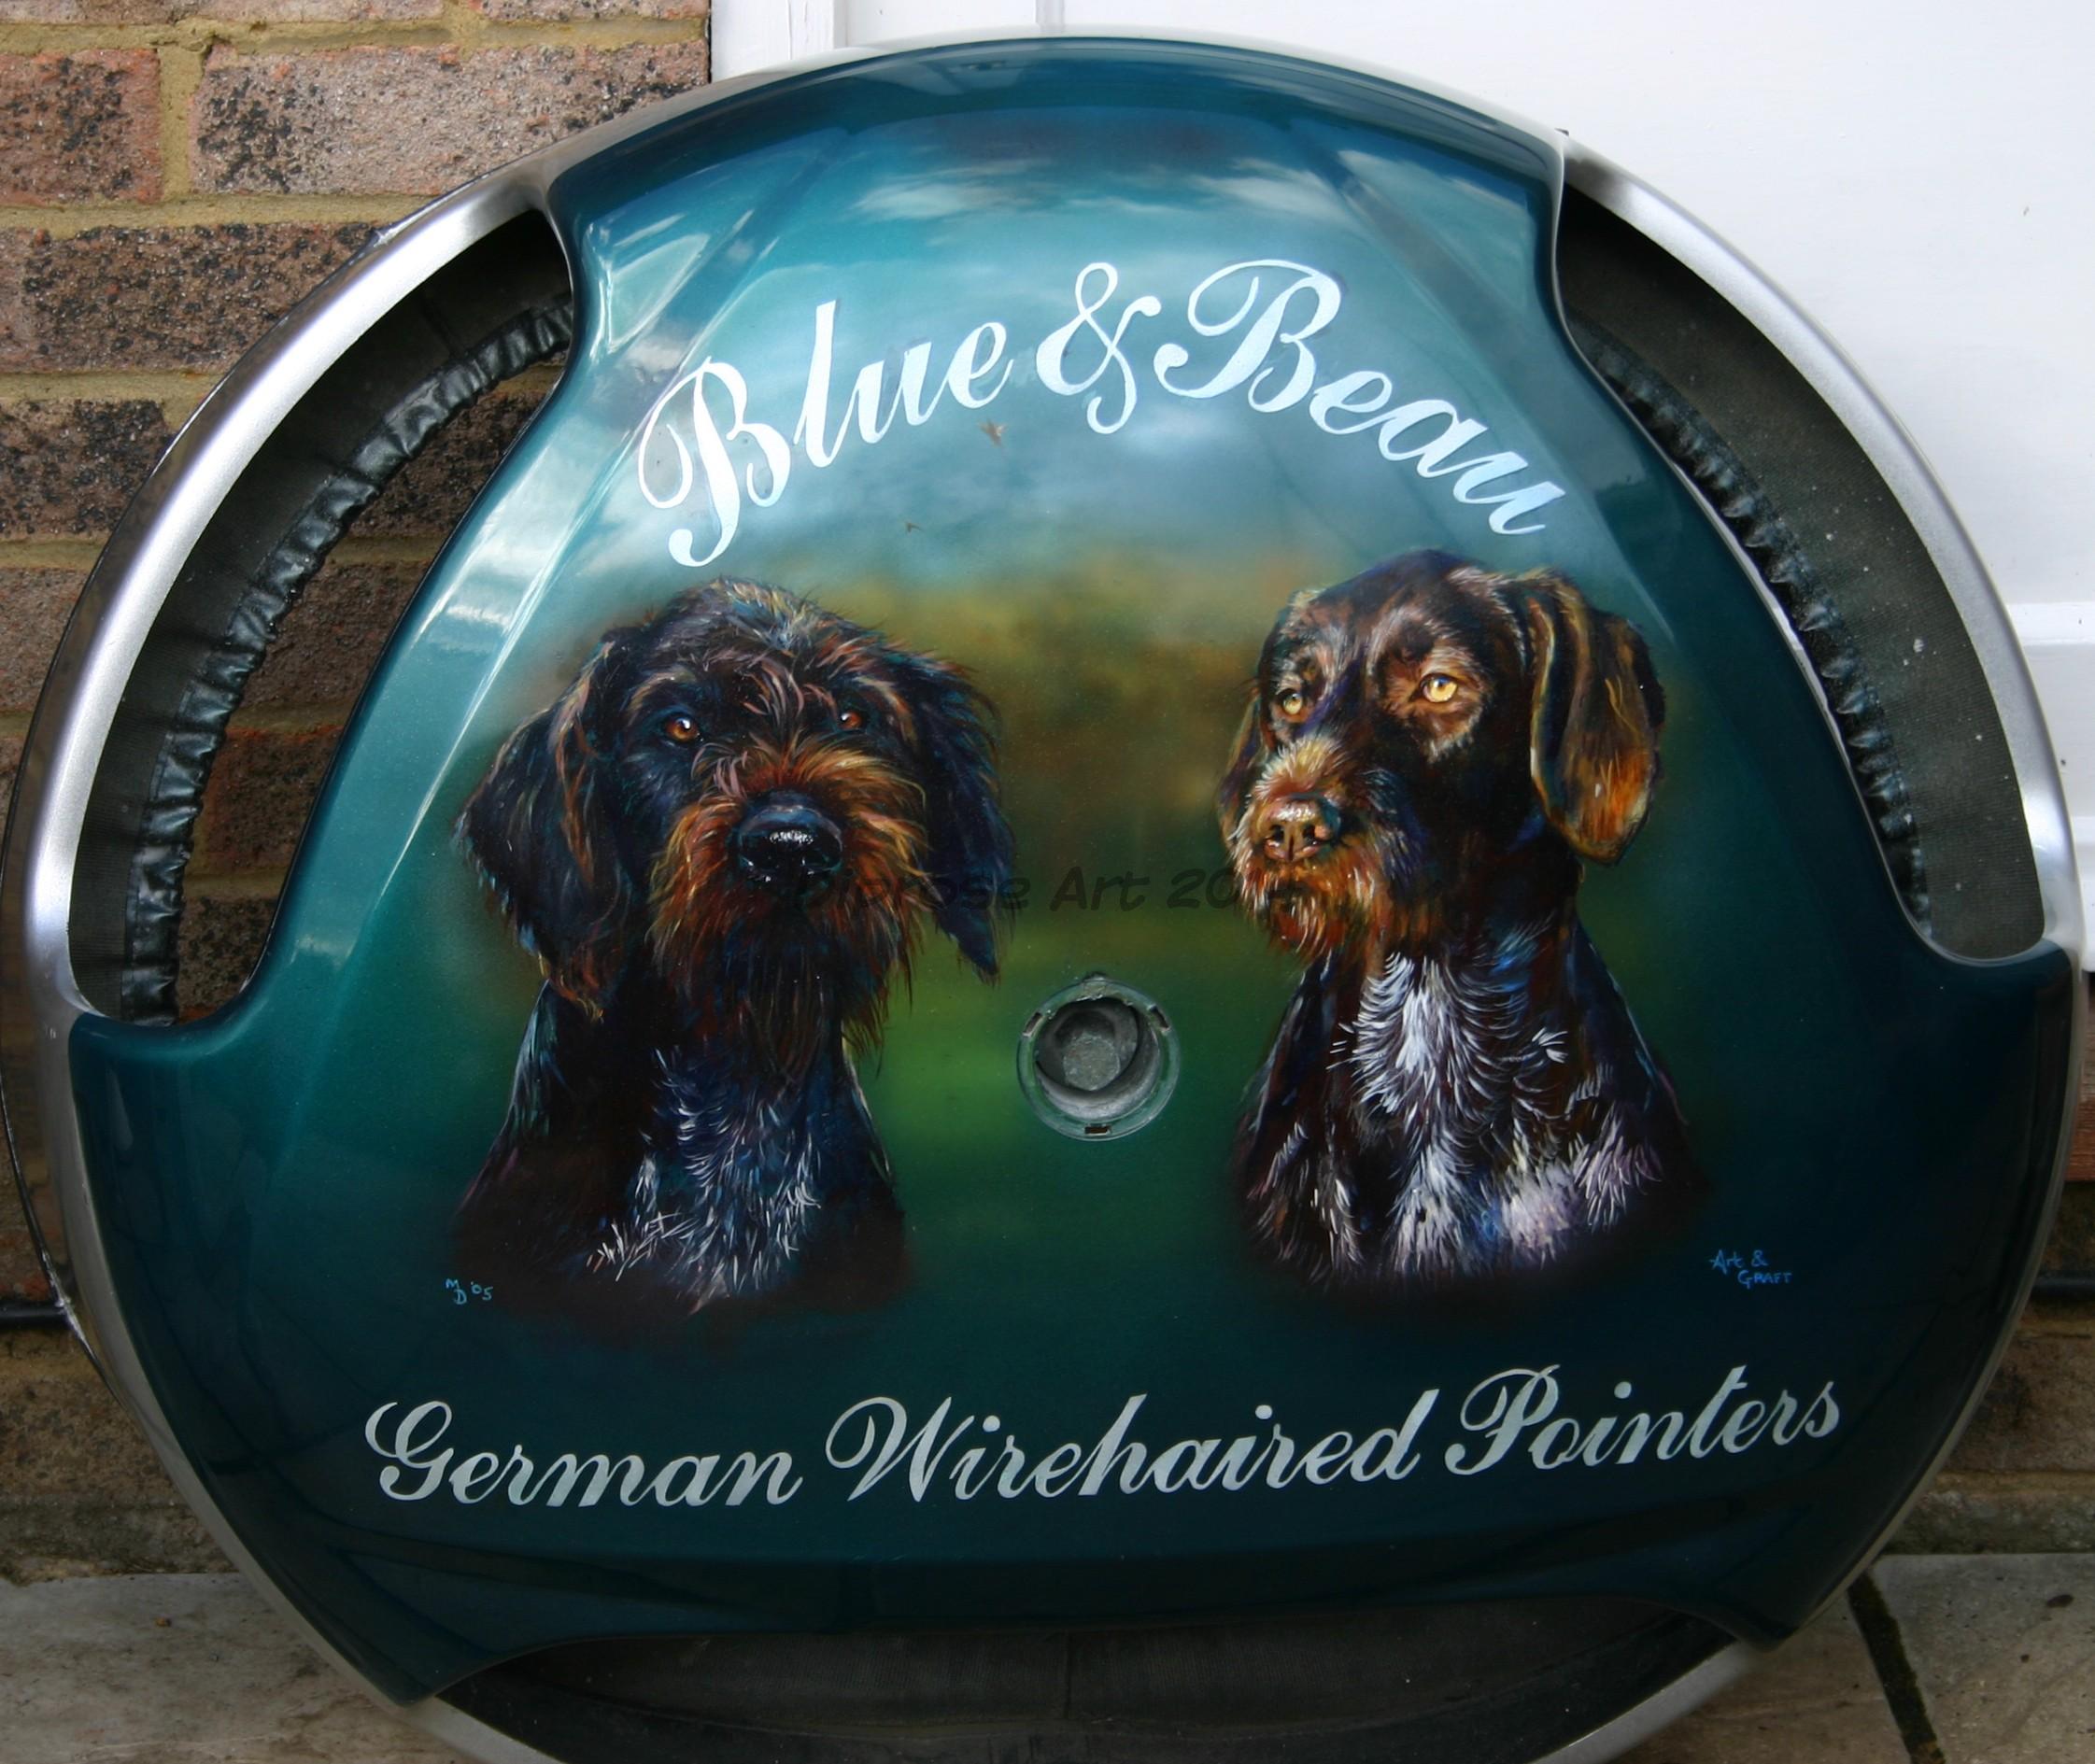 Automotive customisation - German Wire-haired Pointer wheel cover - This is much more personal for your car than a commercial cover - your actual dogs not just the breed!